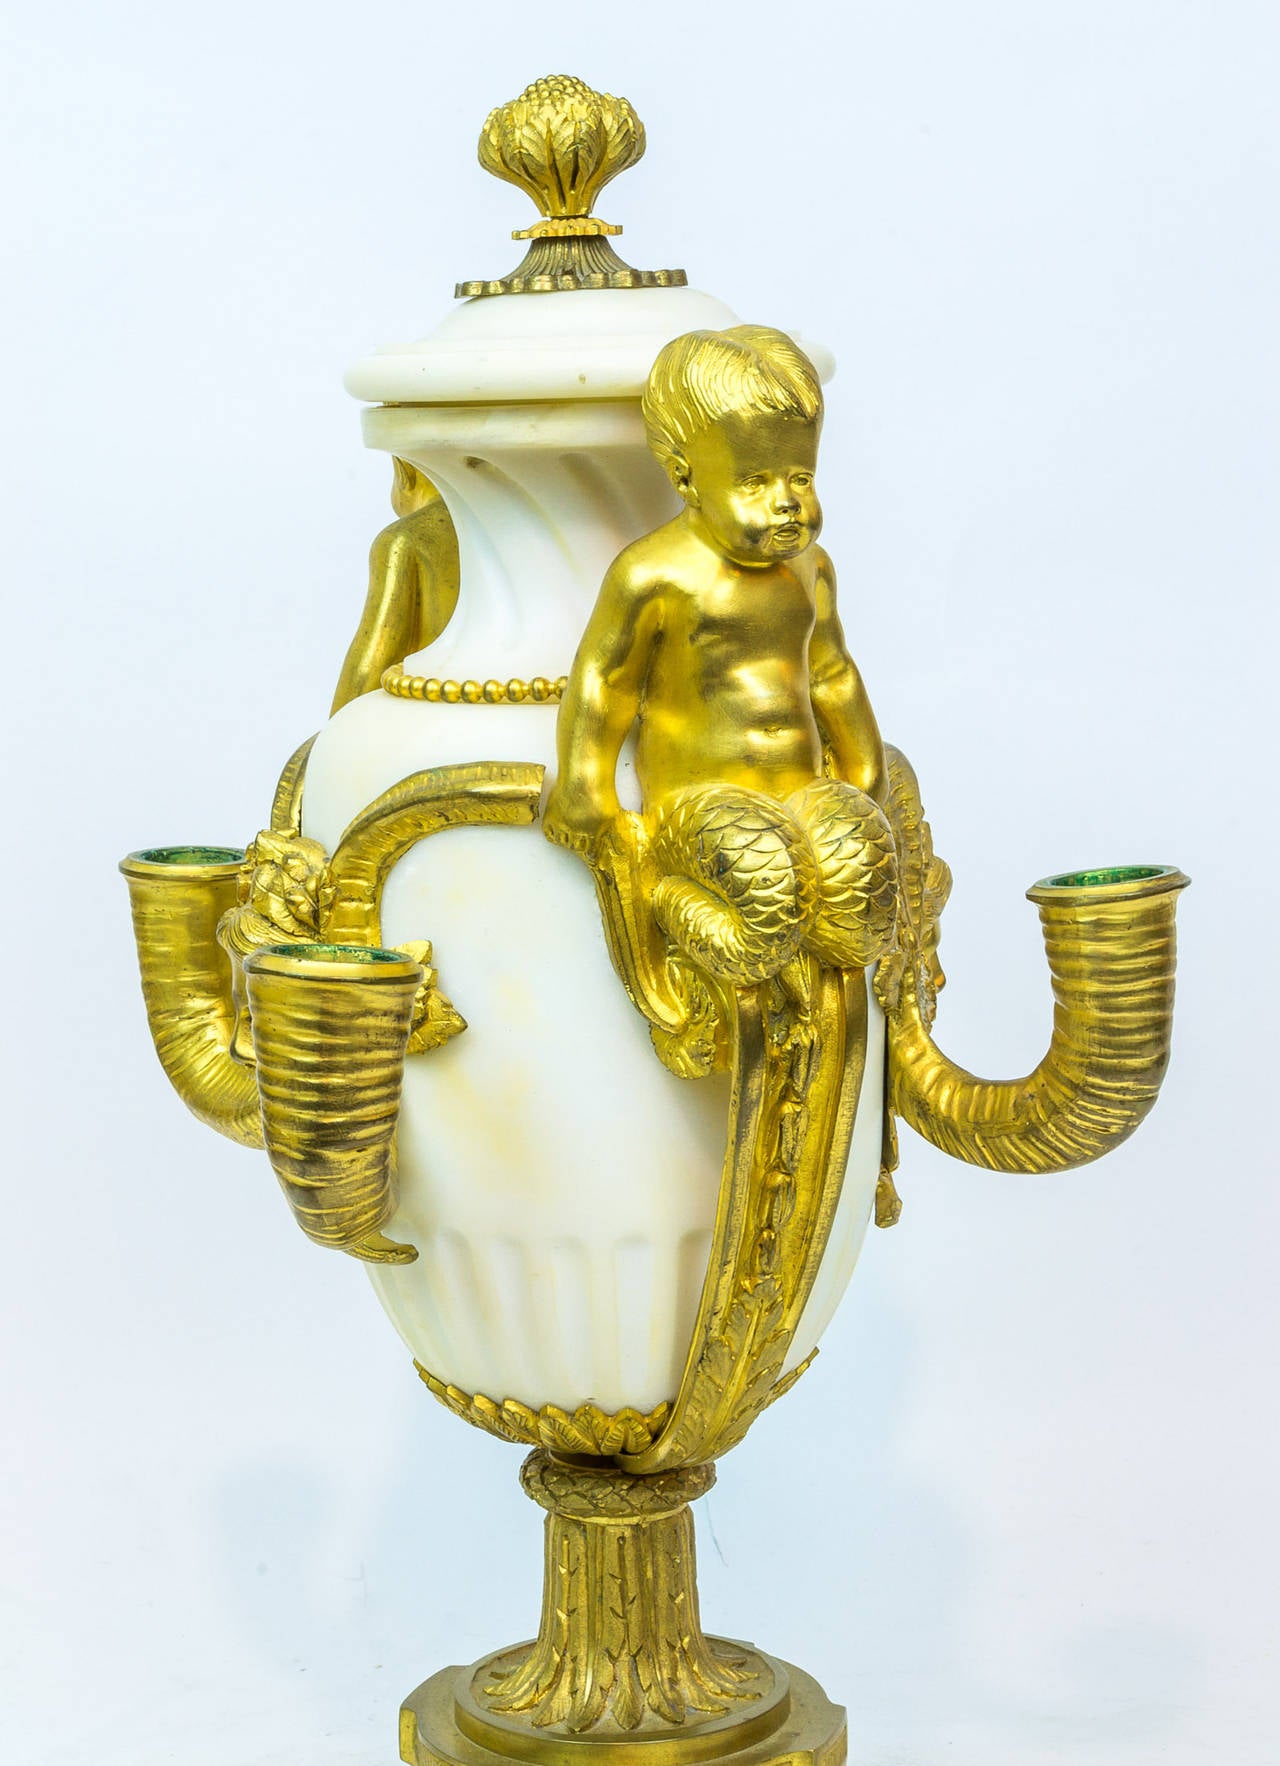 Pair of Louis XV Style Gilt Bronze and Marble Figural Urns with Seated Puttis on Side
Stock Number: DA71